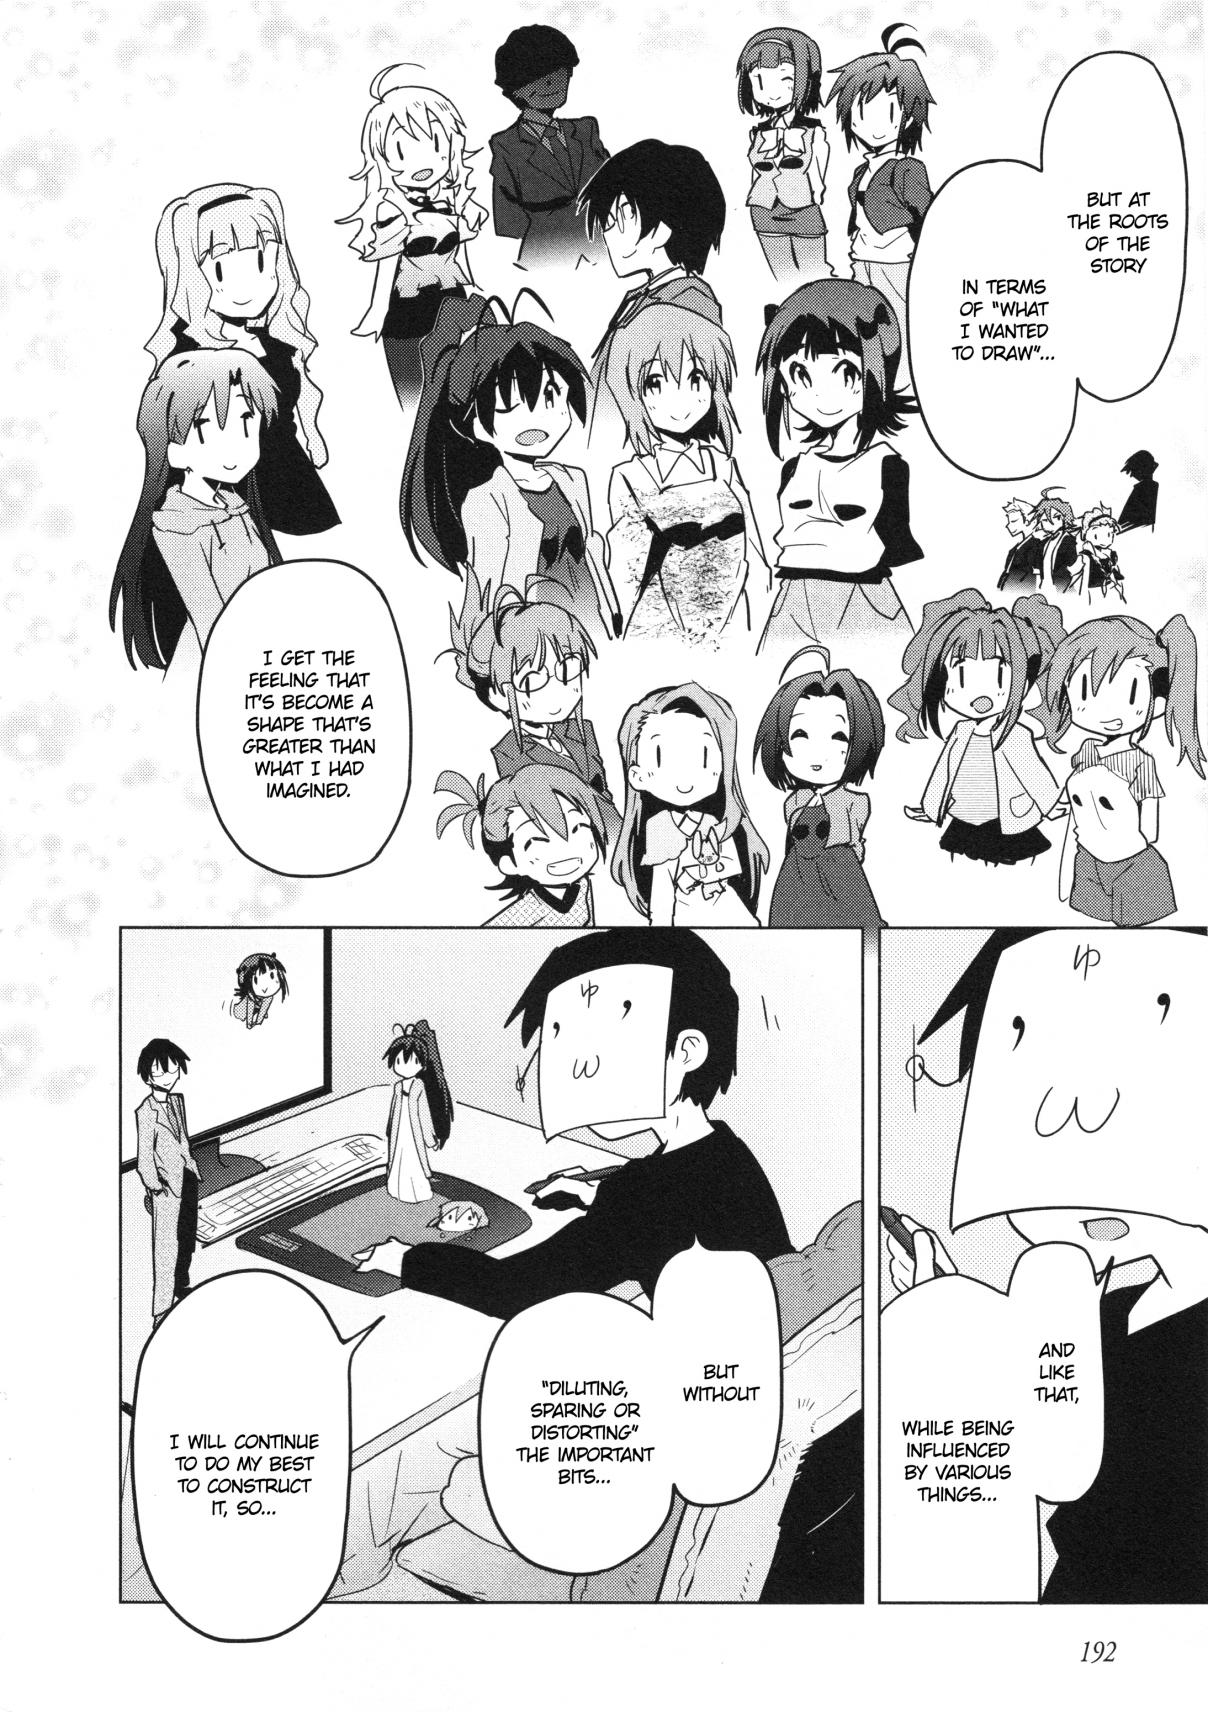 THE iDOLM@STER 2 The world is all one!! Vol. 4 Ch. 28.1 Omake